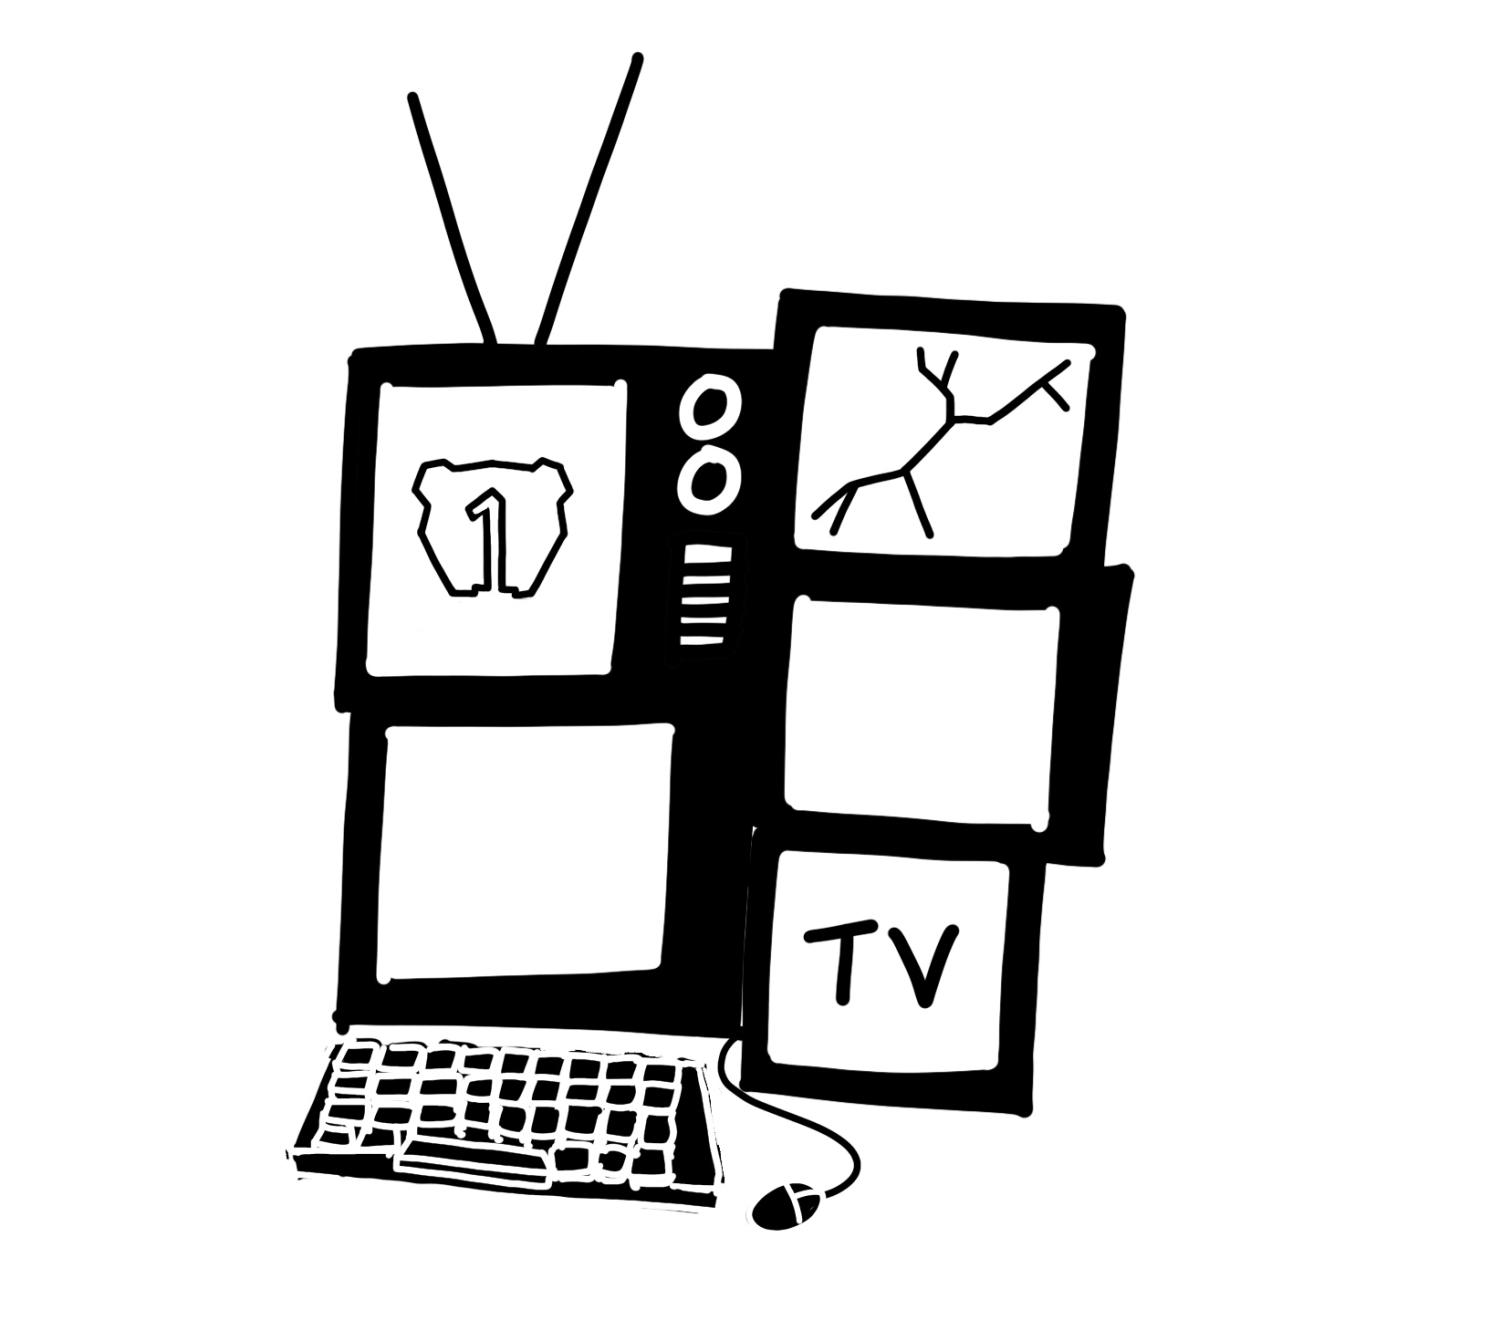 black and white image of tvs and one mission hills logo